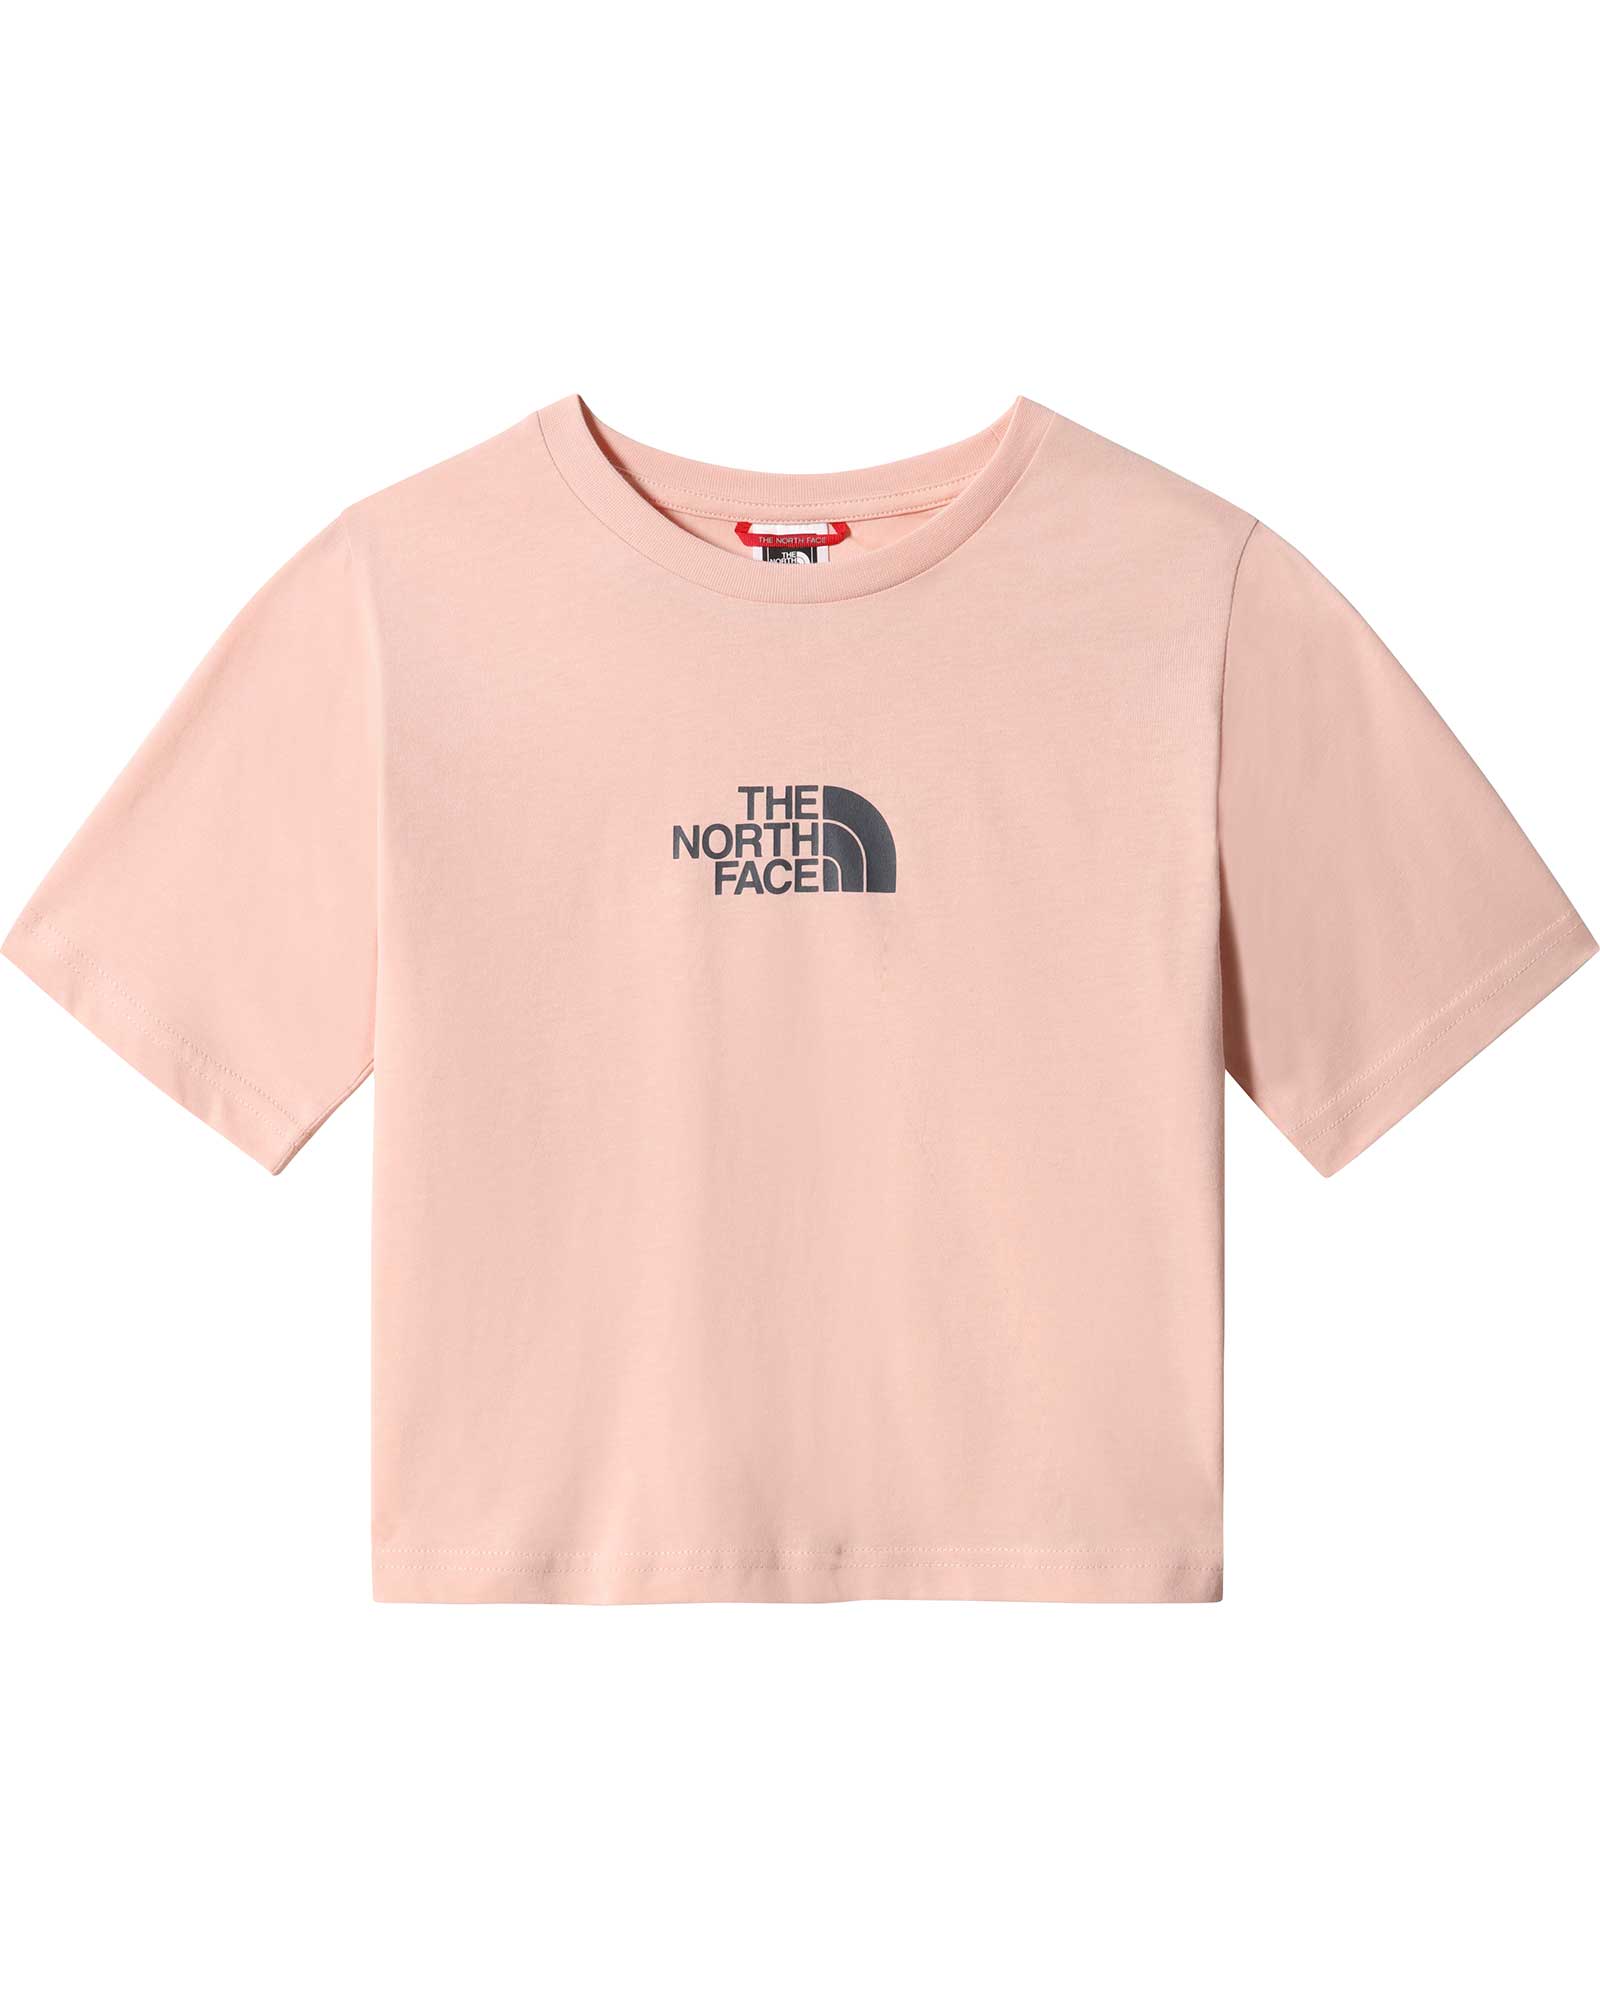 Product image of The North Face Cropped Graphic Girls' T-Shirt